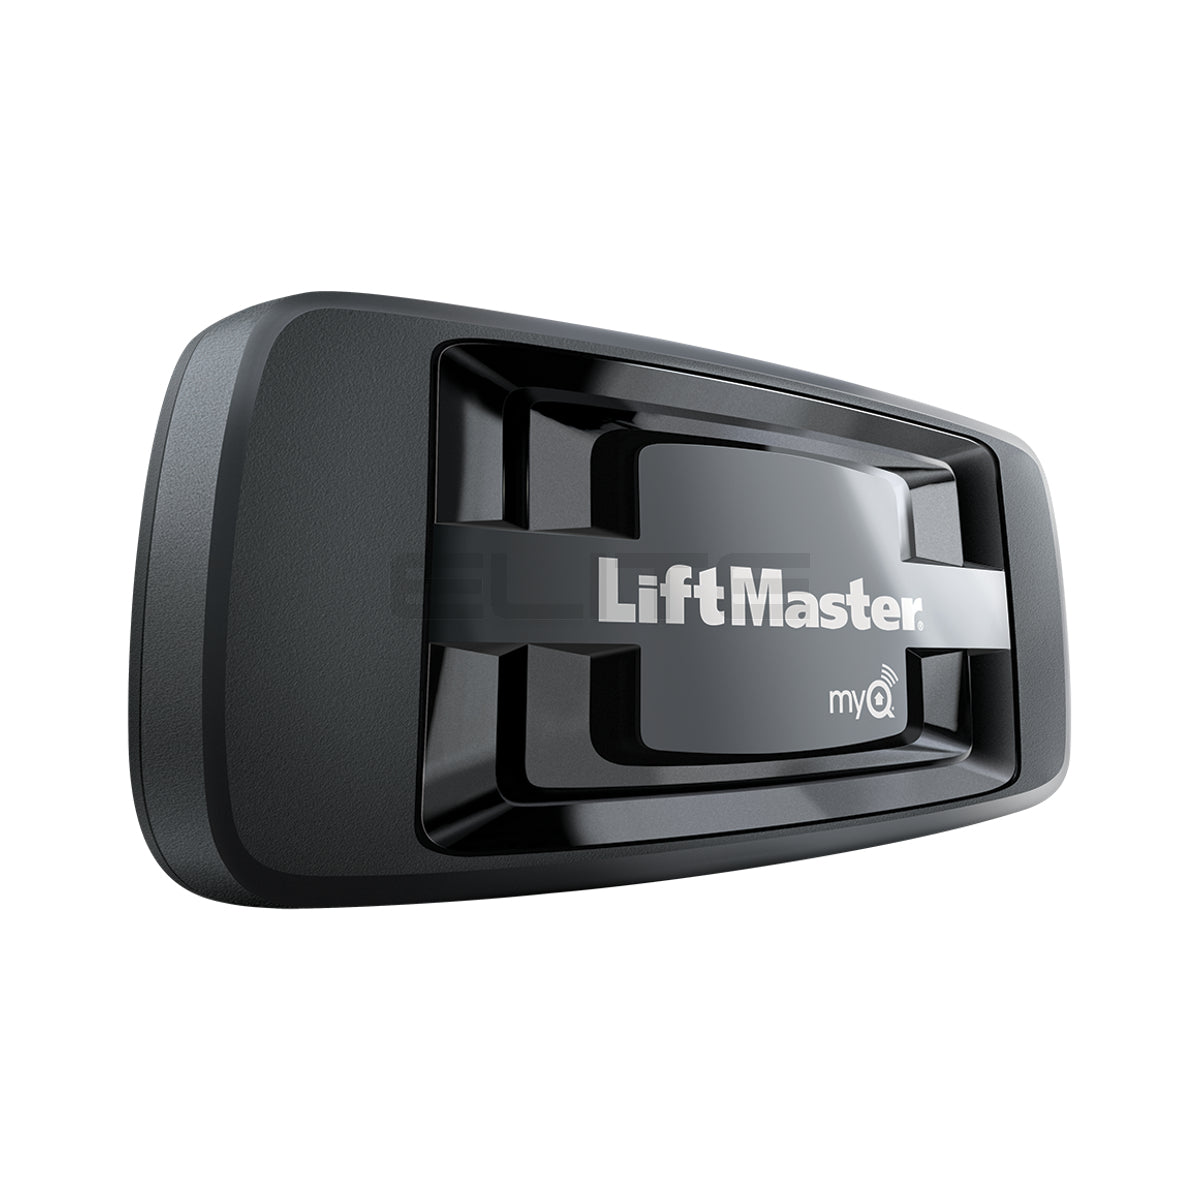 Liftmaster 828lm Smartphone Controller (left view)